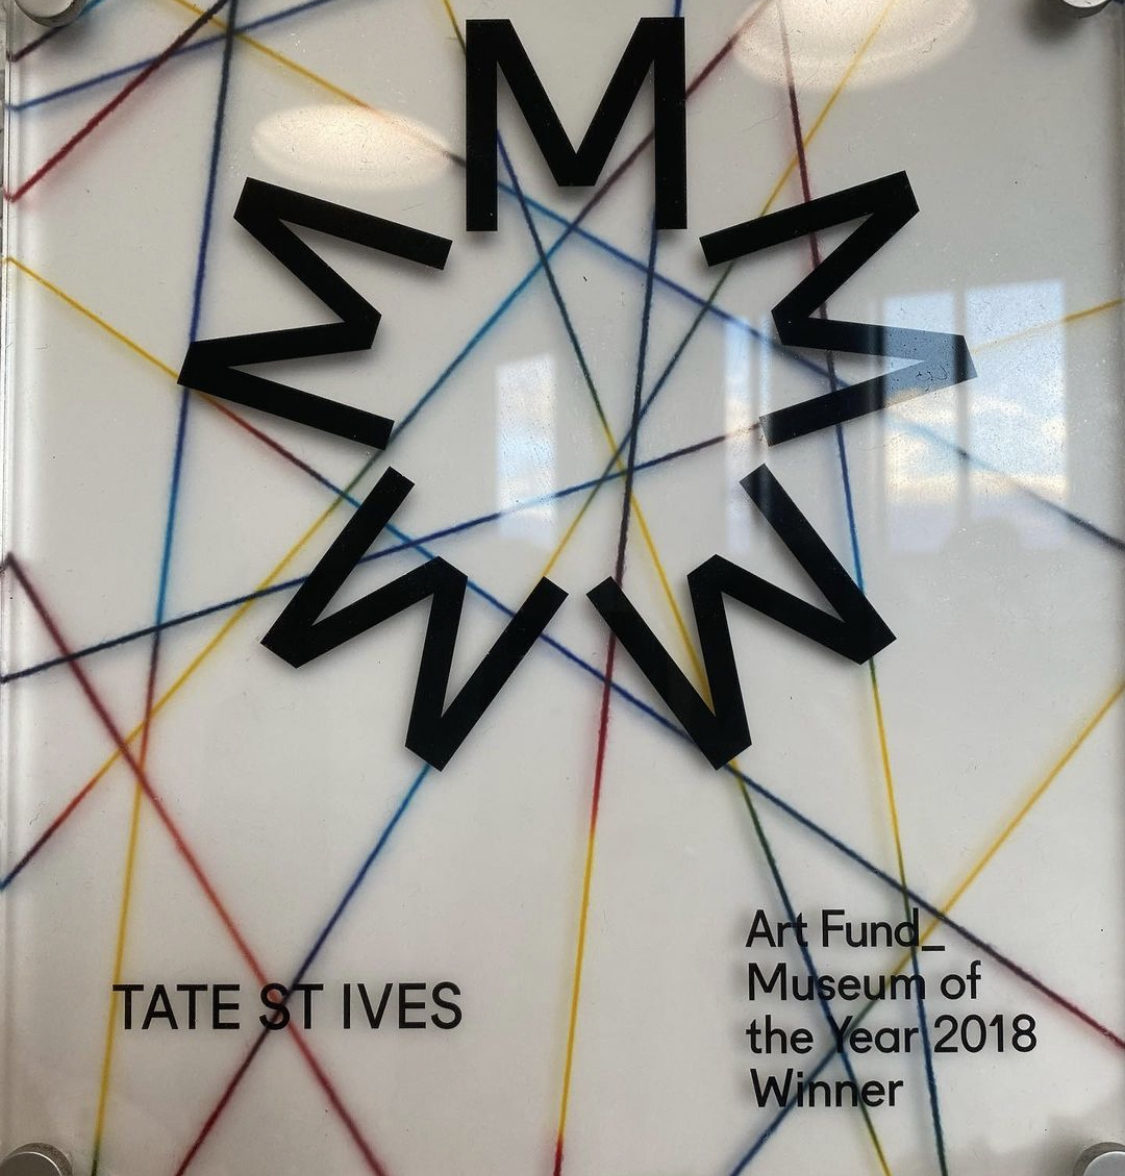 Tate-St-Ives-gallery-Ad Minolti-Jamie-Fobert-Architects-2022-art-fund-museum-of-the-year